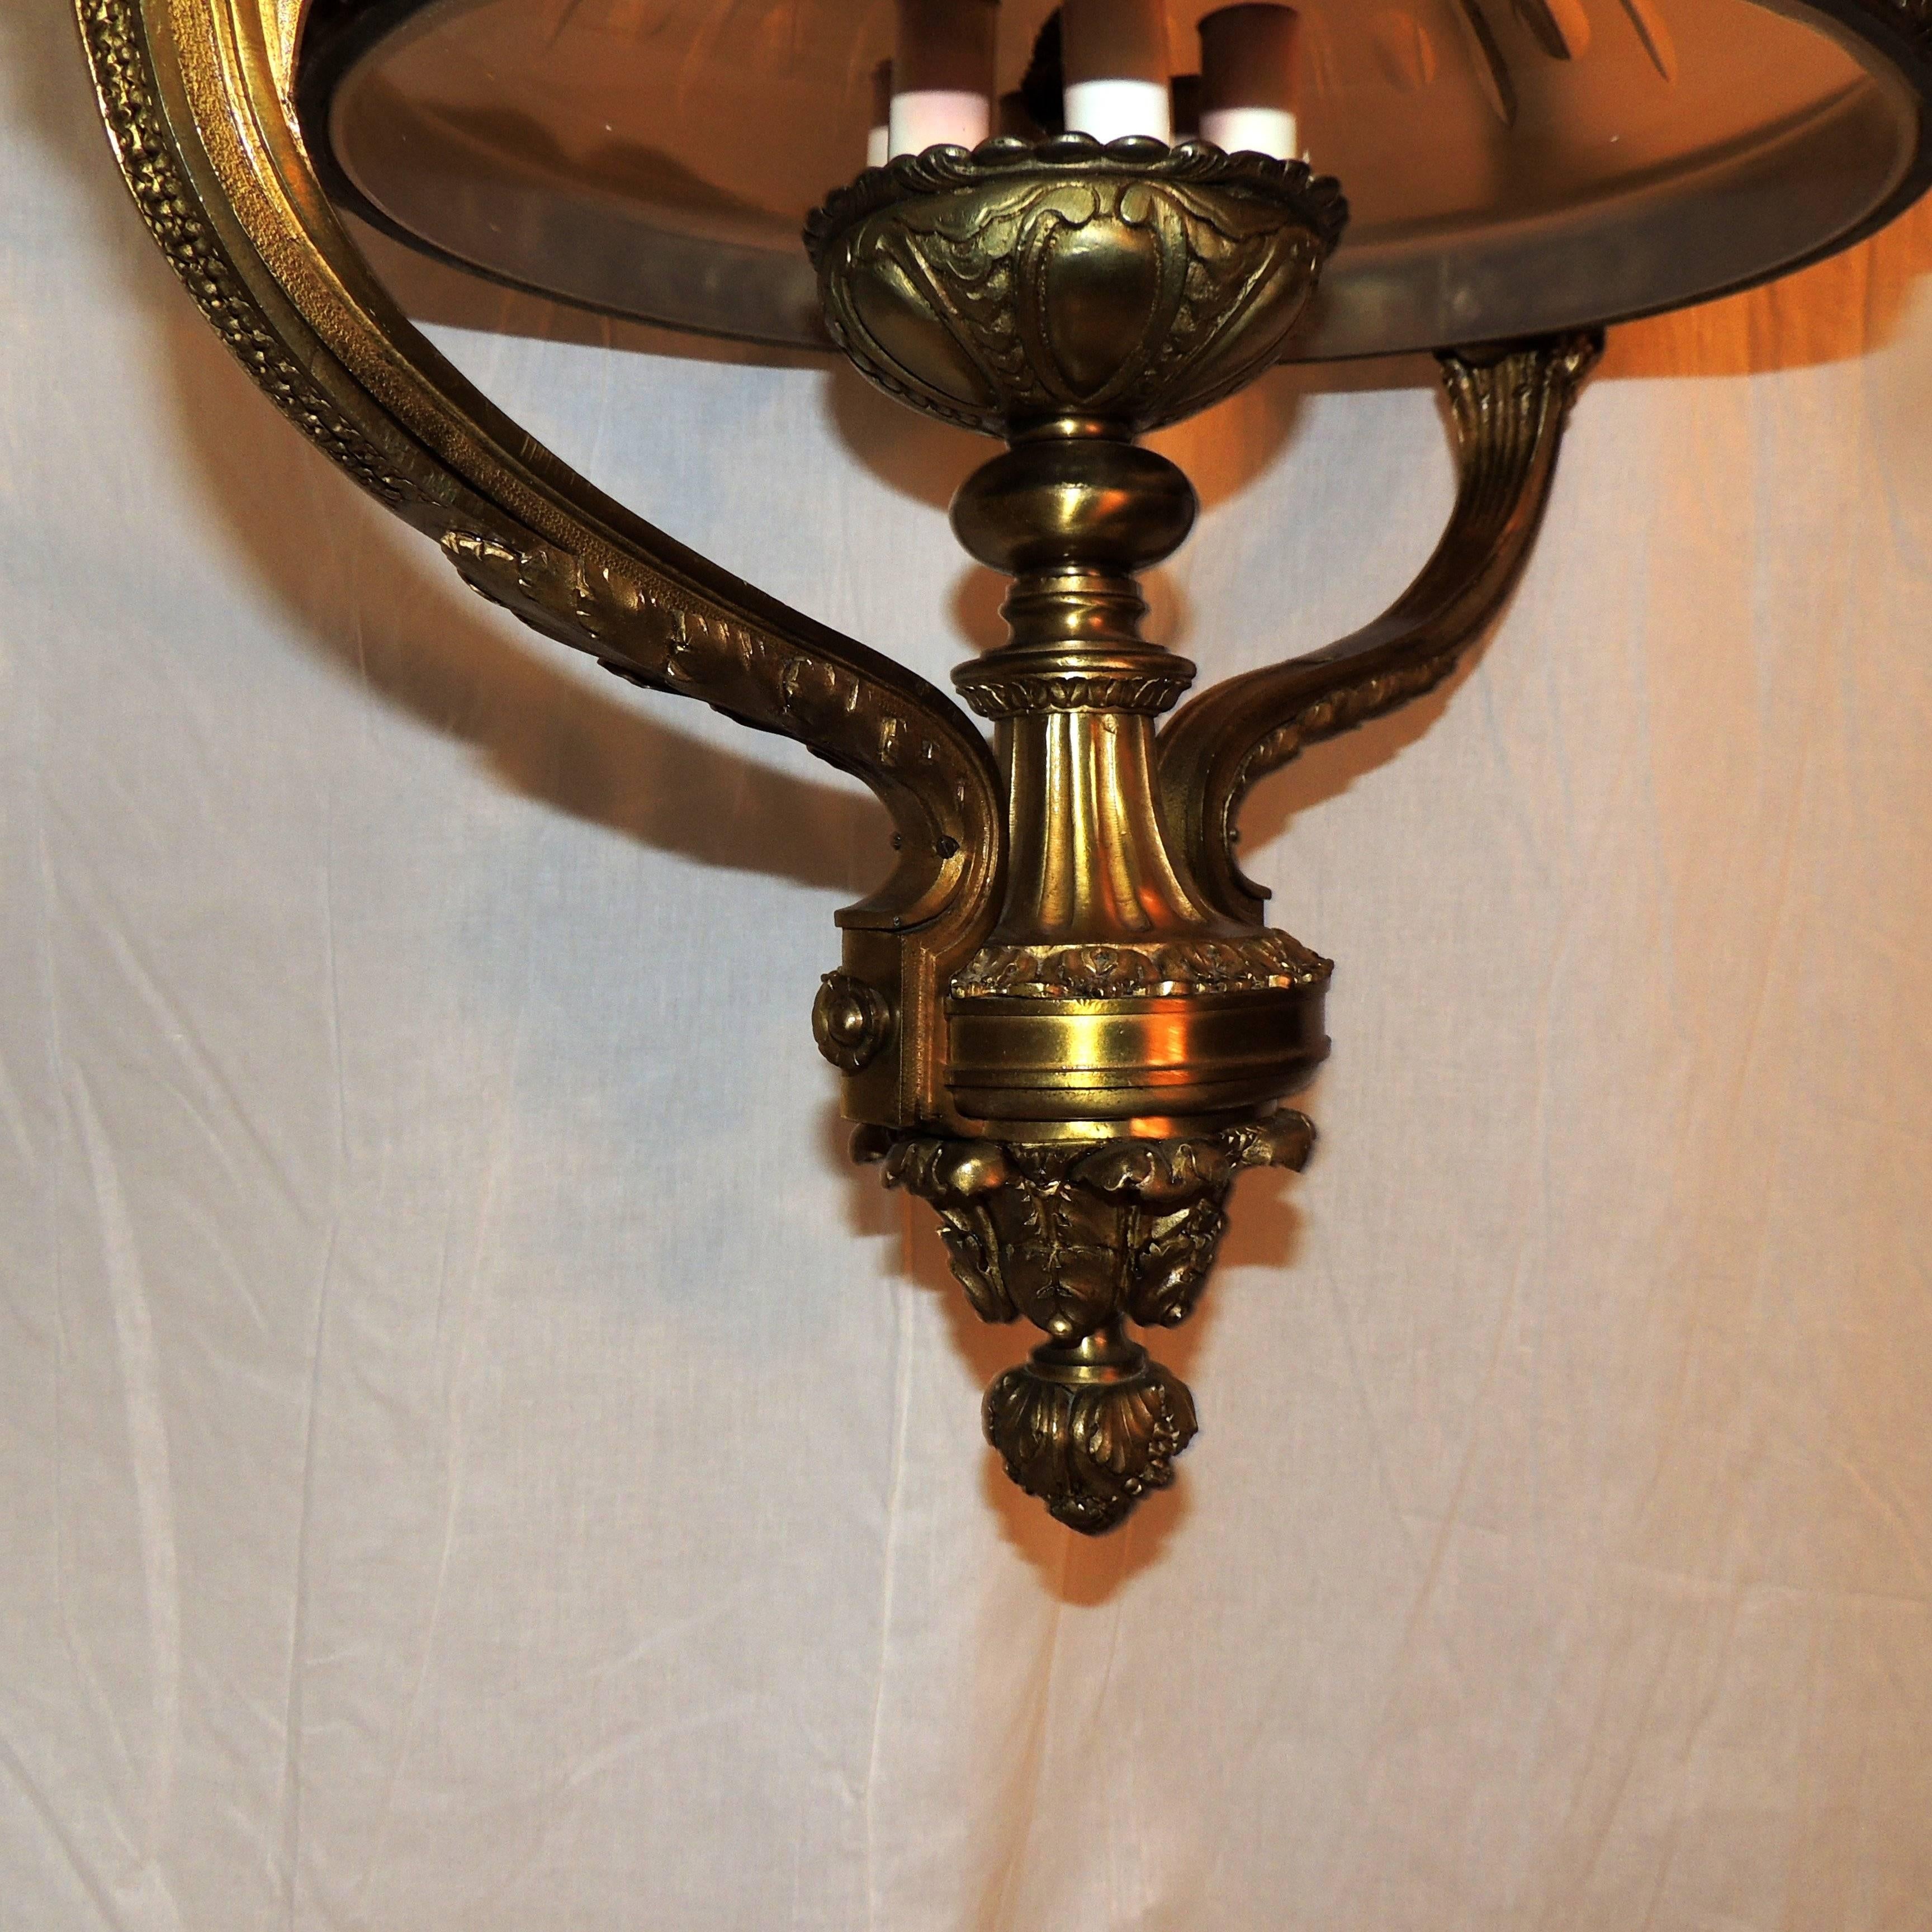 Monumental French Victorian Gilt Bronze Frosted Globe Chandelier Fixture Lantern For Sale 3